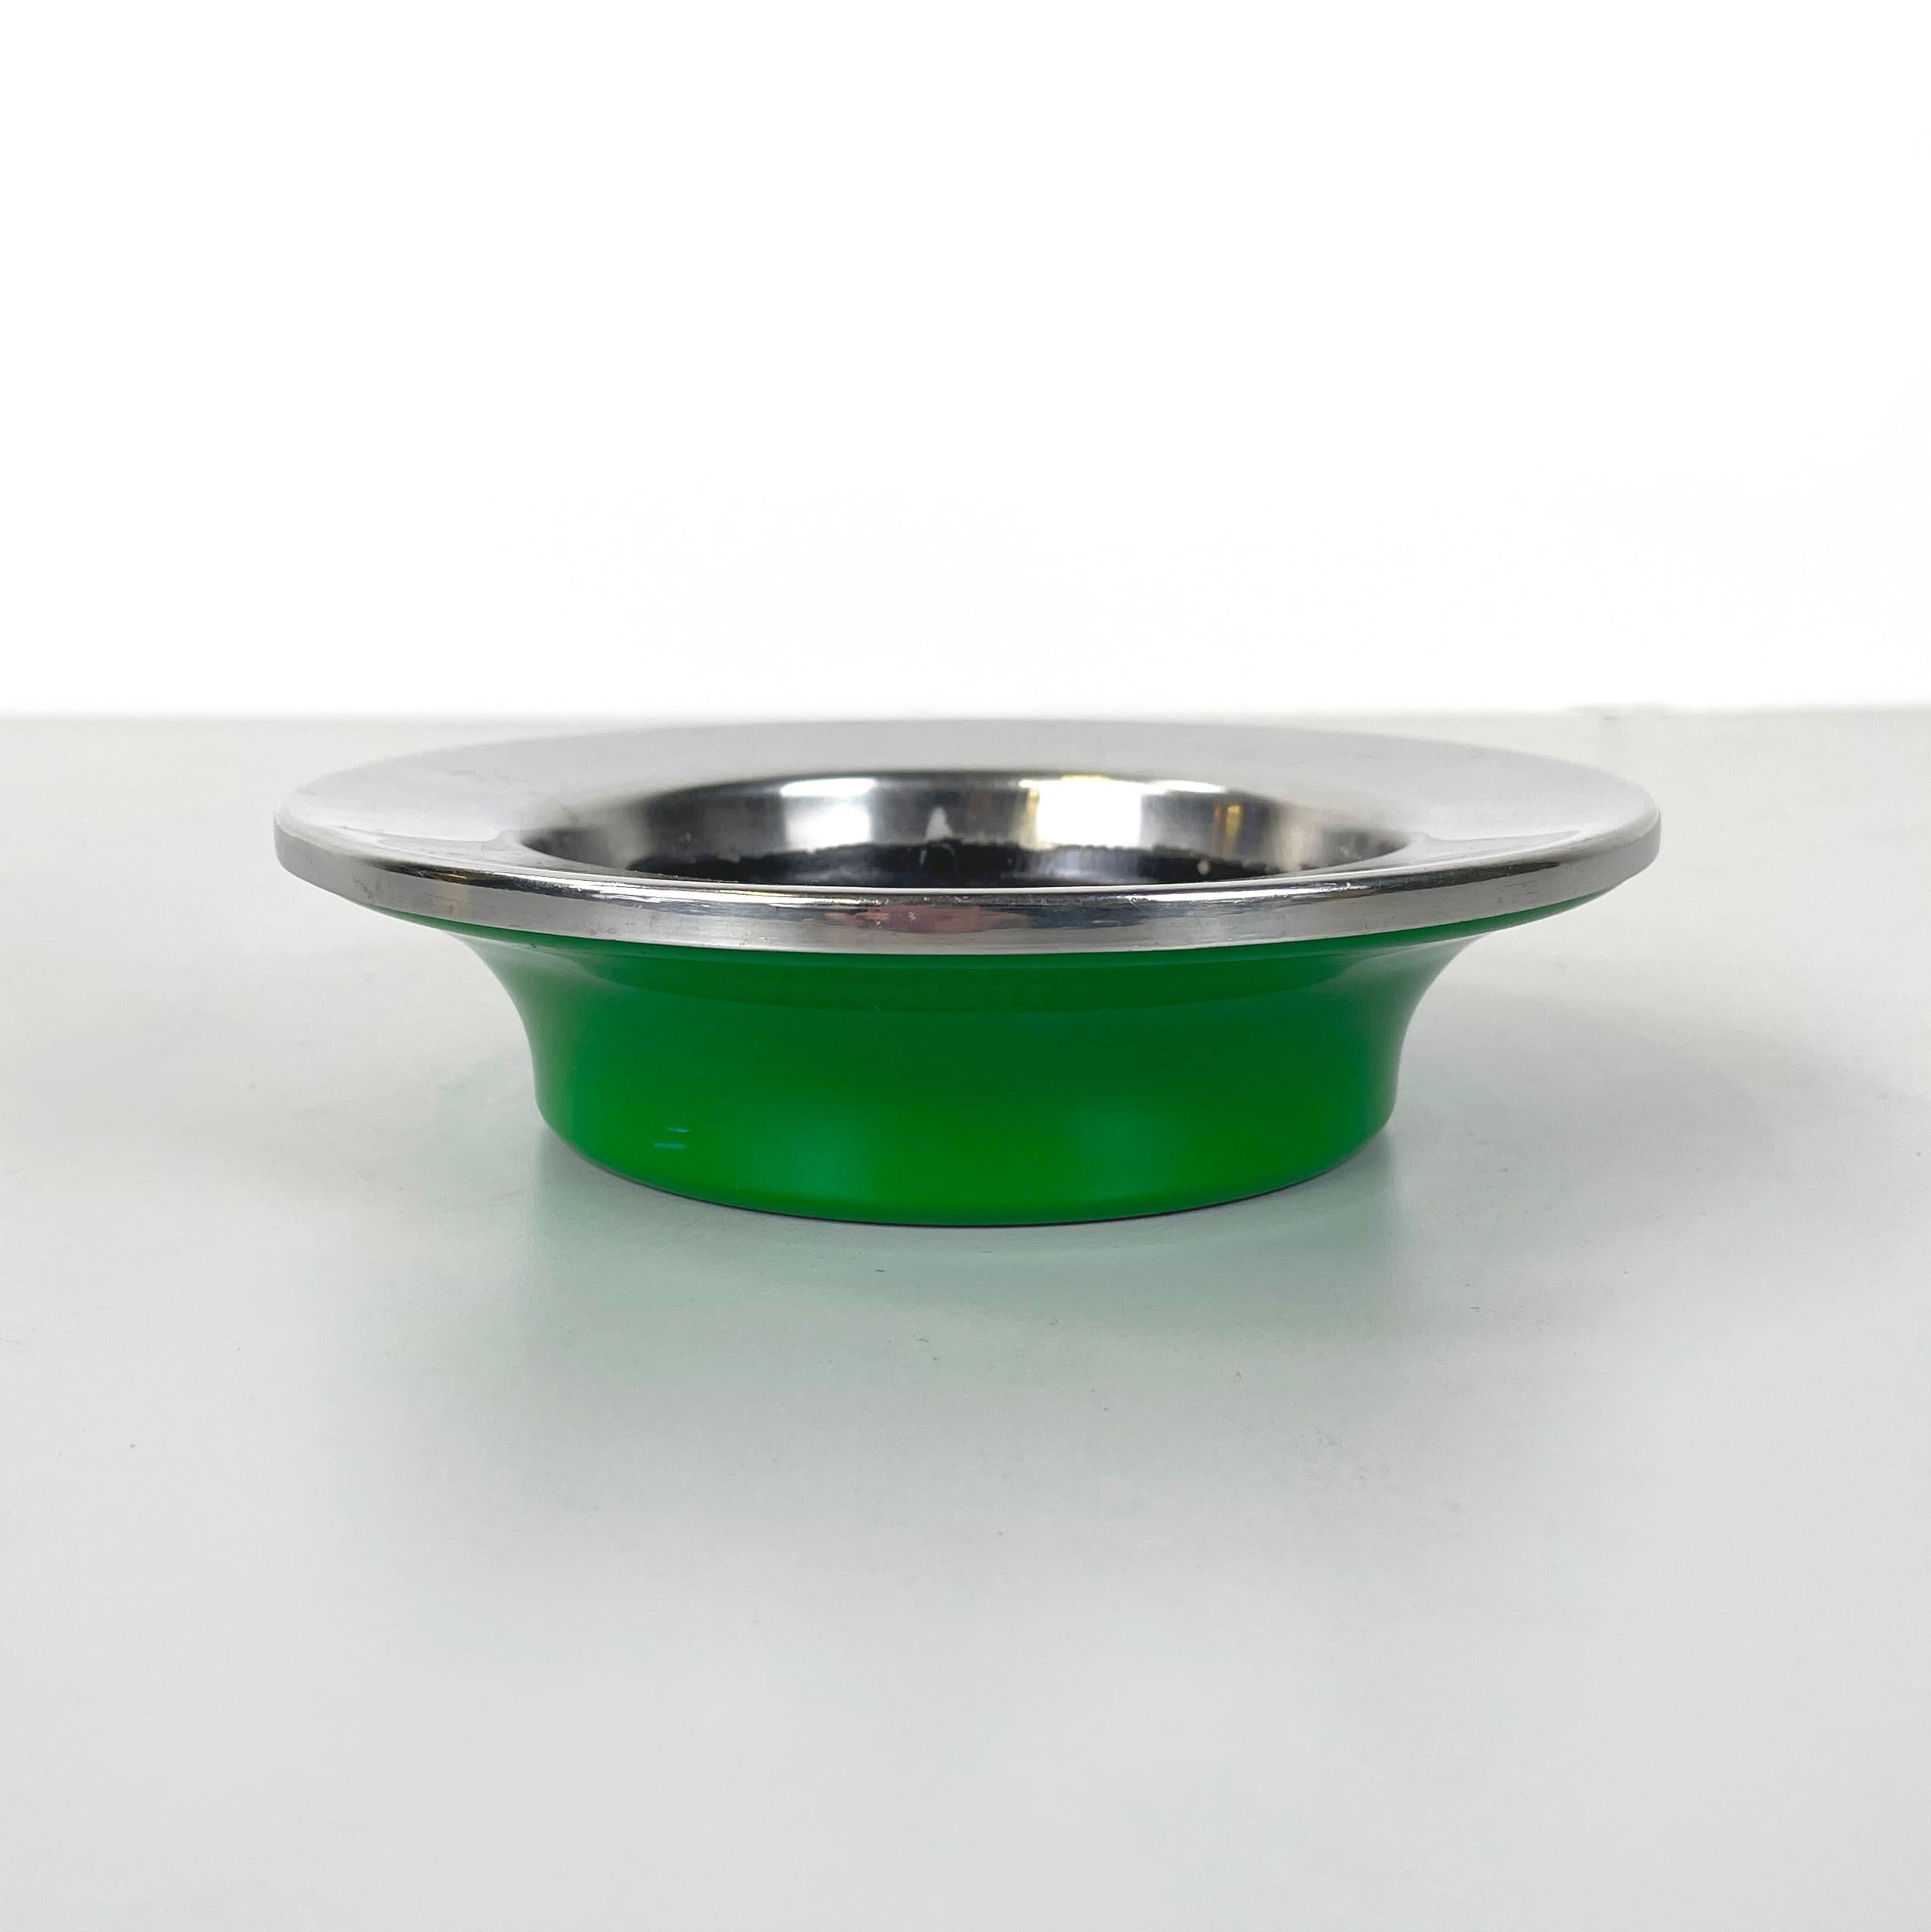 Italian modern Green plastic and metal Ashtray by Gino Colombini for Kartell, 1970s
Round ashtray with black painted metal plate and with cantilevered chromed metal profile. Round base in bright green plastic. It can be used as a